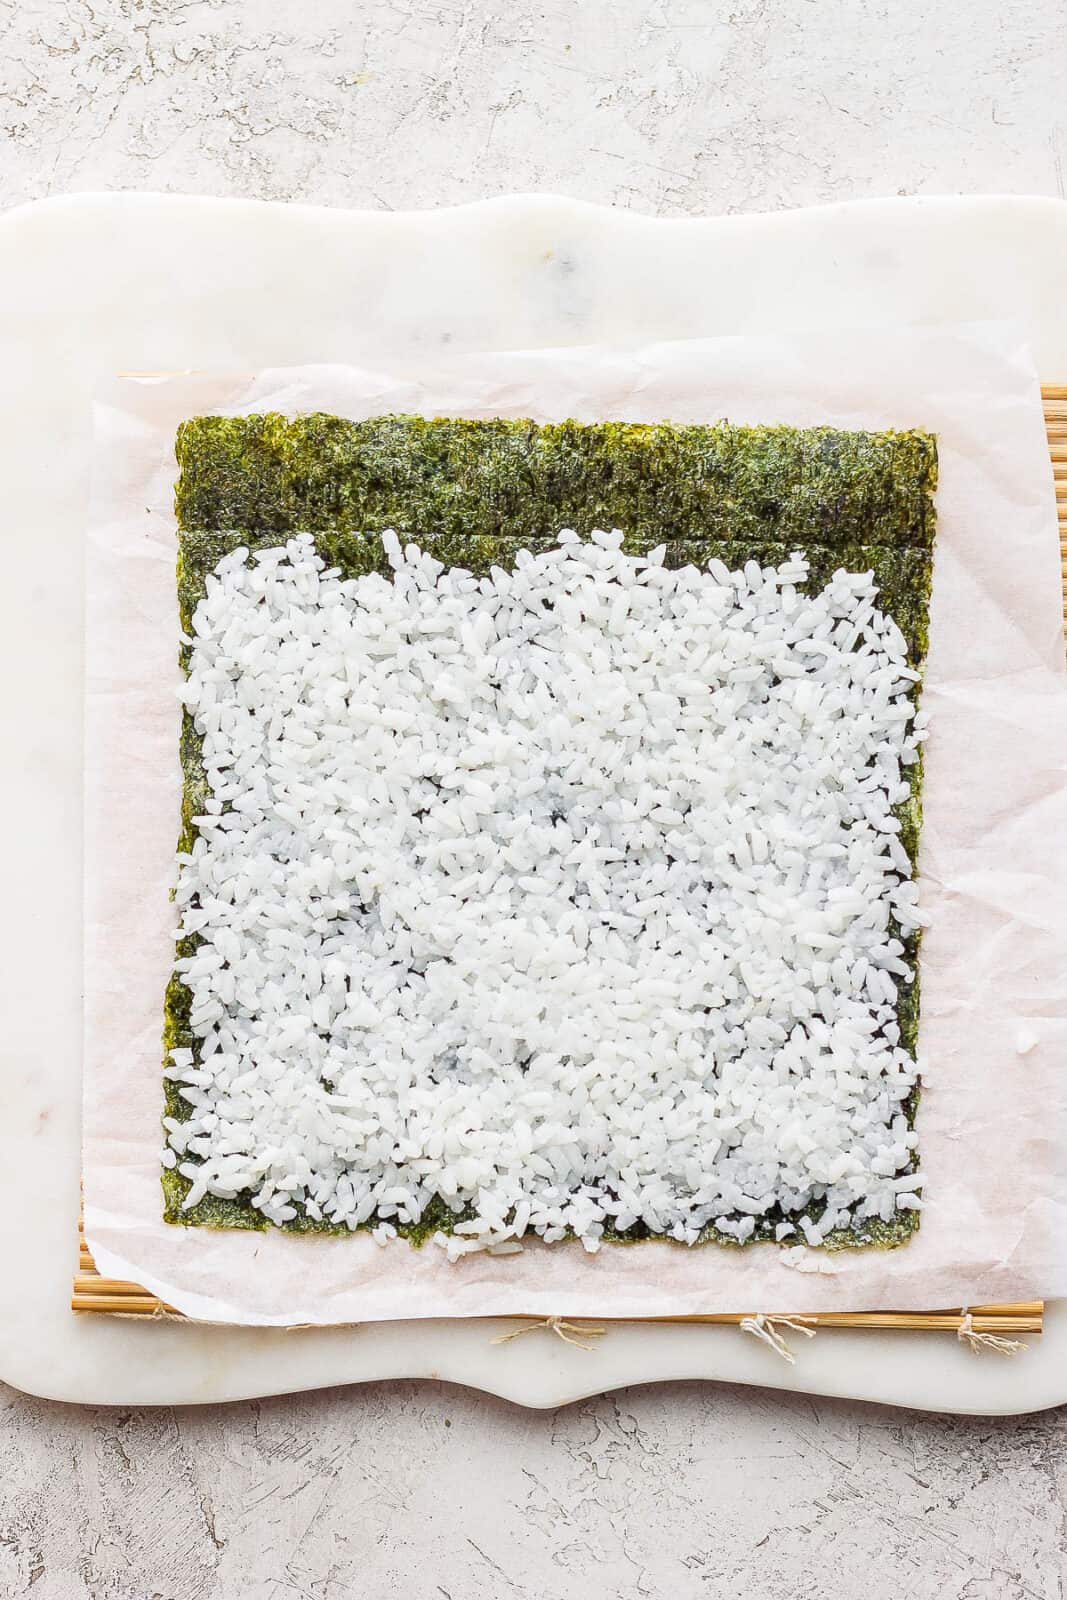 A thin layer of rice covering all but the top 1/2 inch of the nori sheet.